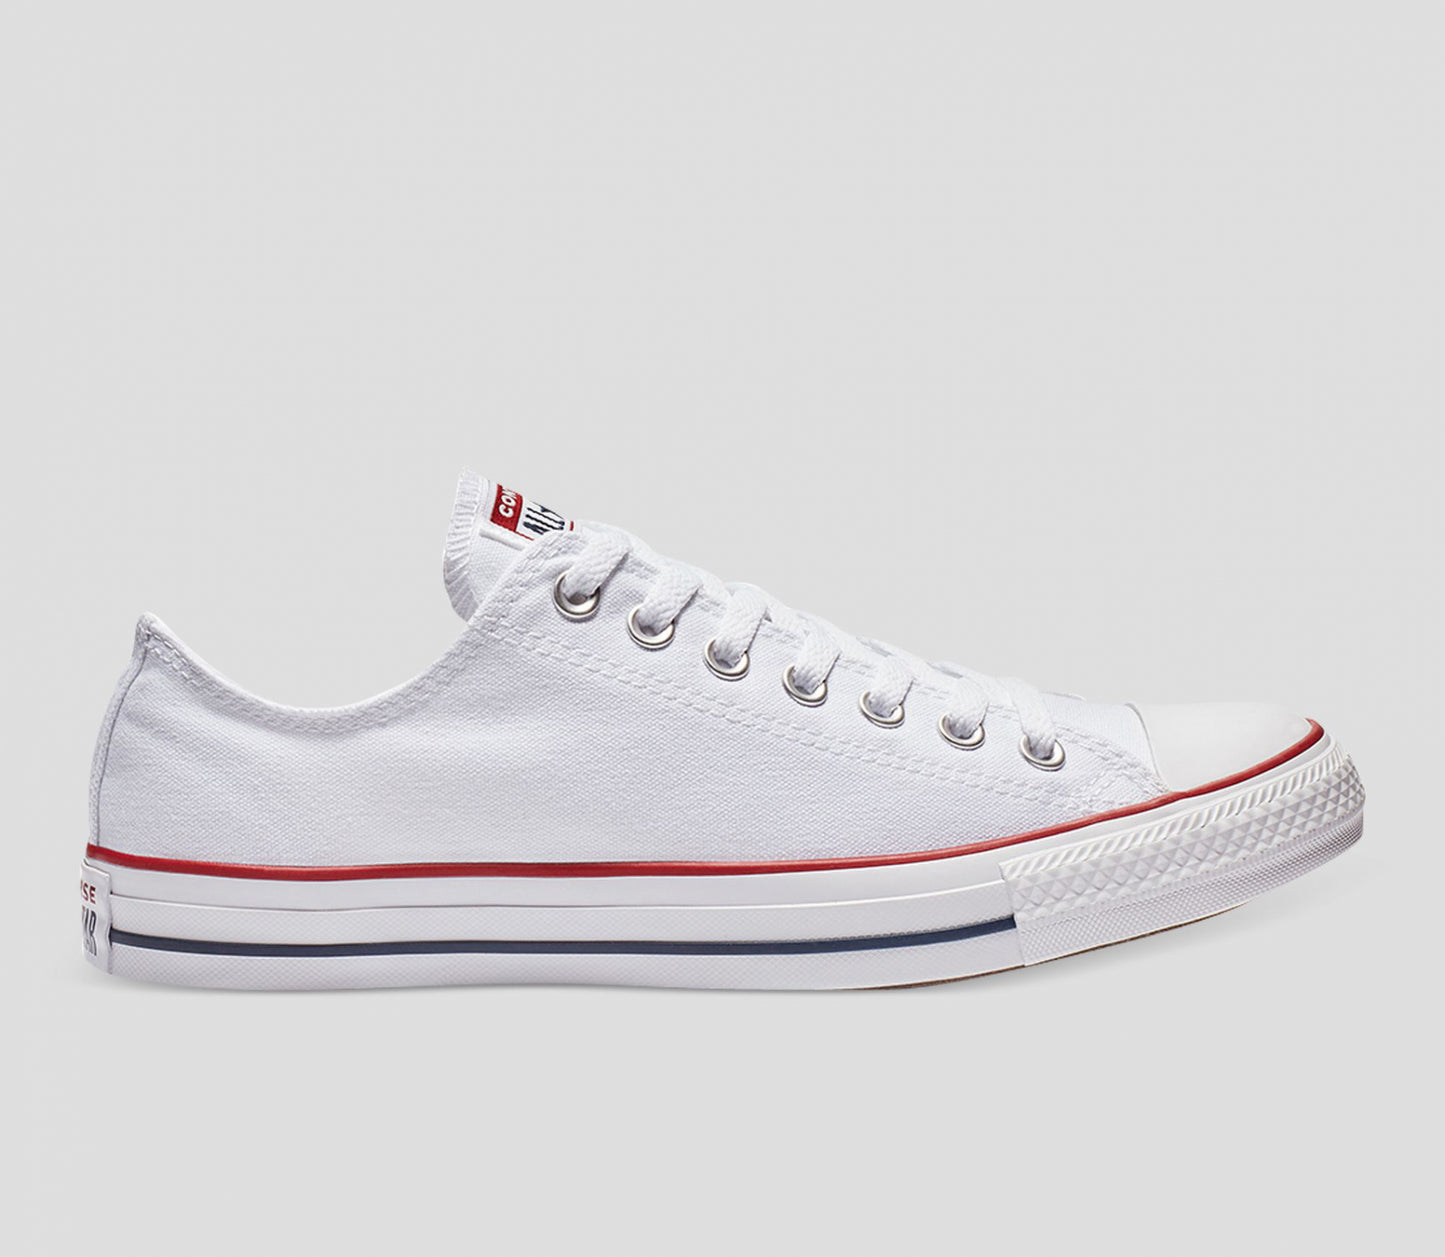 CONVERSE Chuck Taylor All Star Low Shoe - Optical White - VENUE.